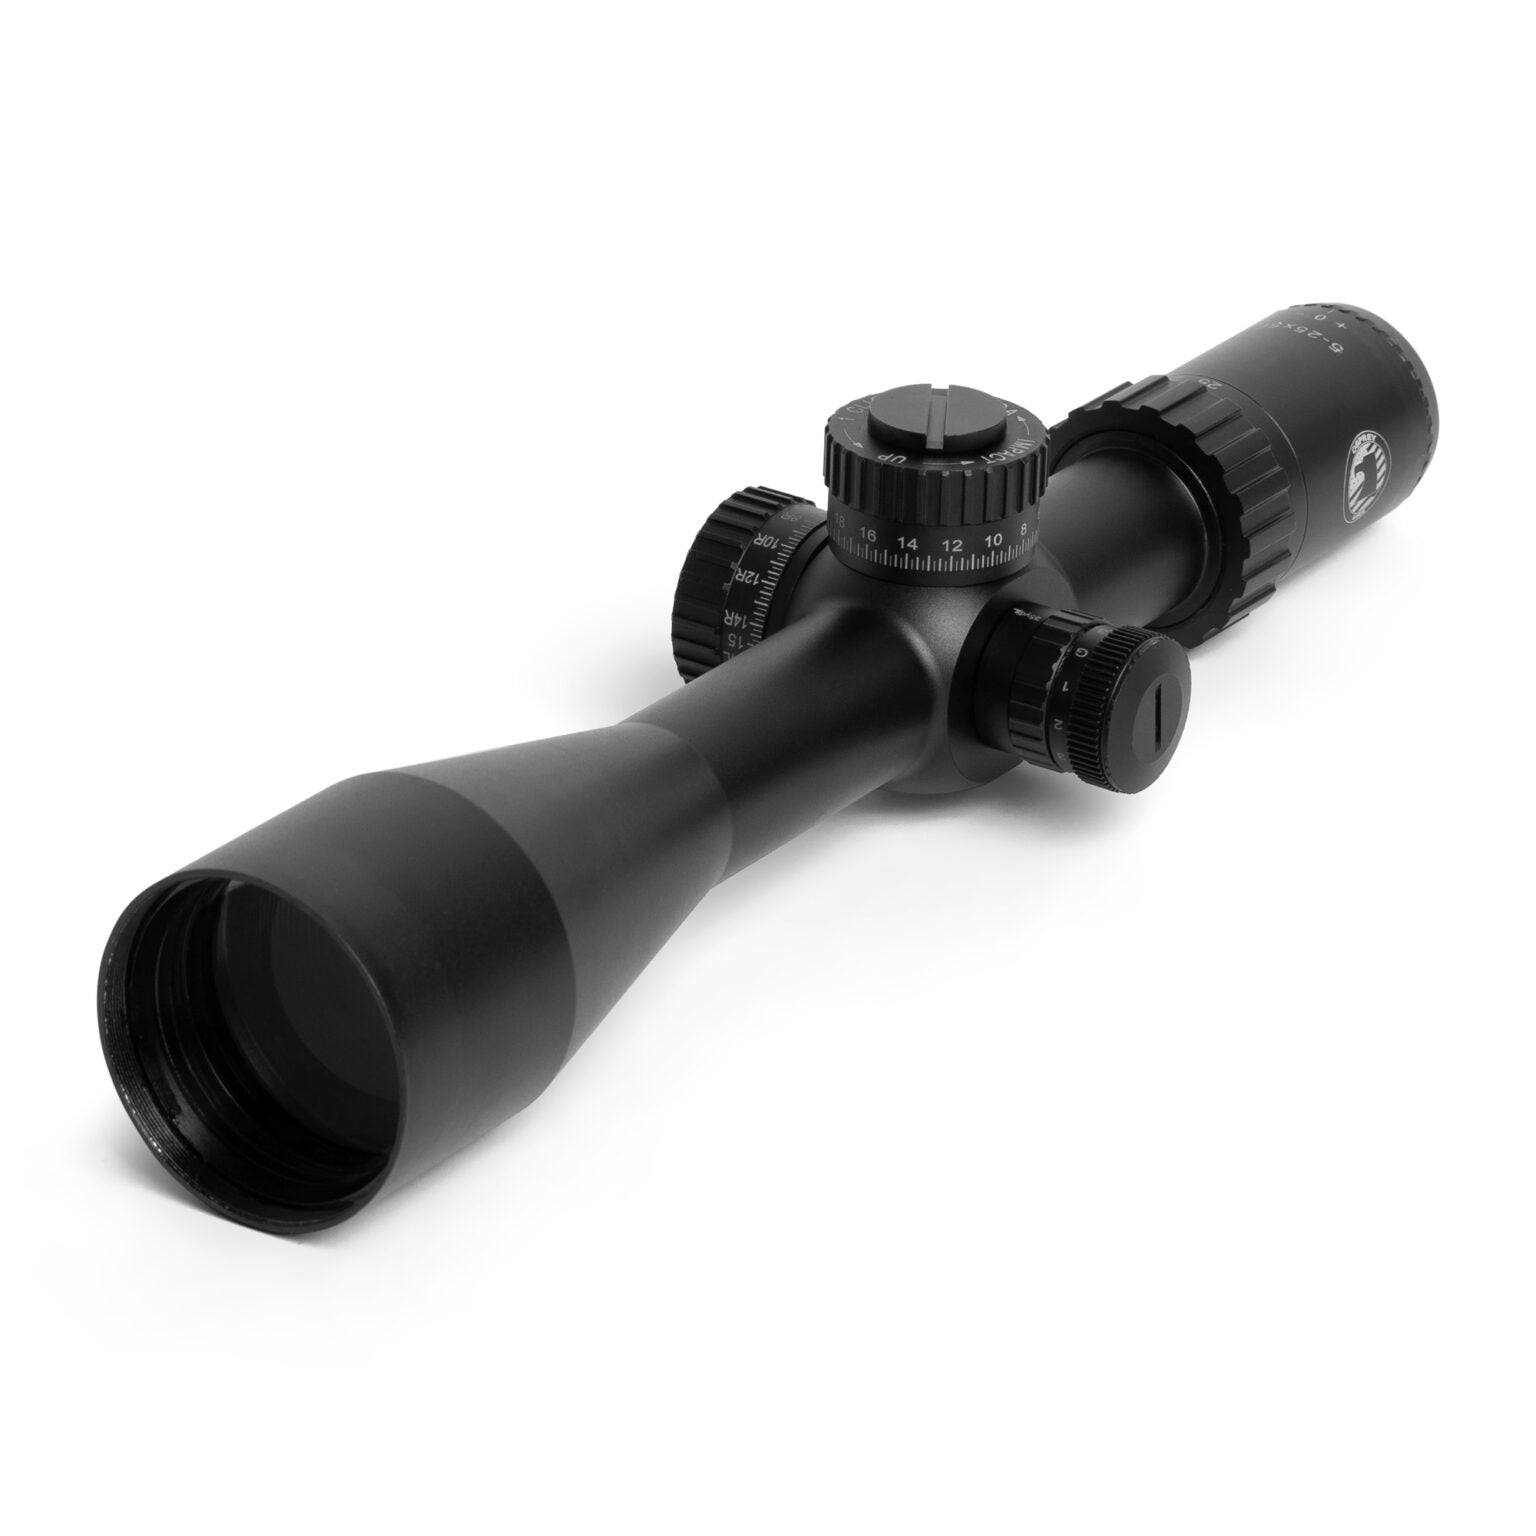 First Focal Plane Scopes